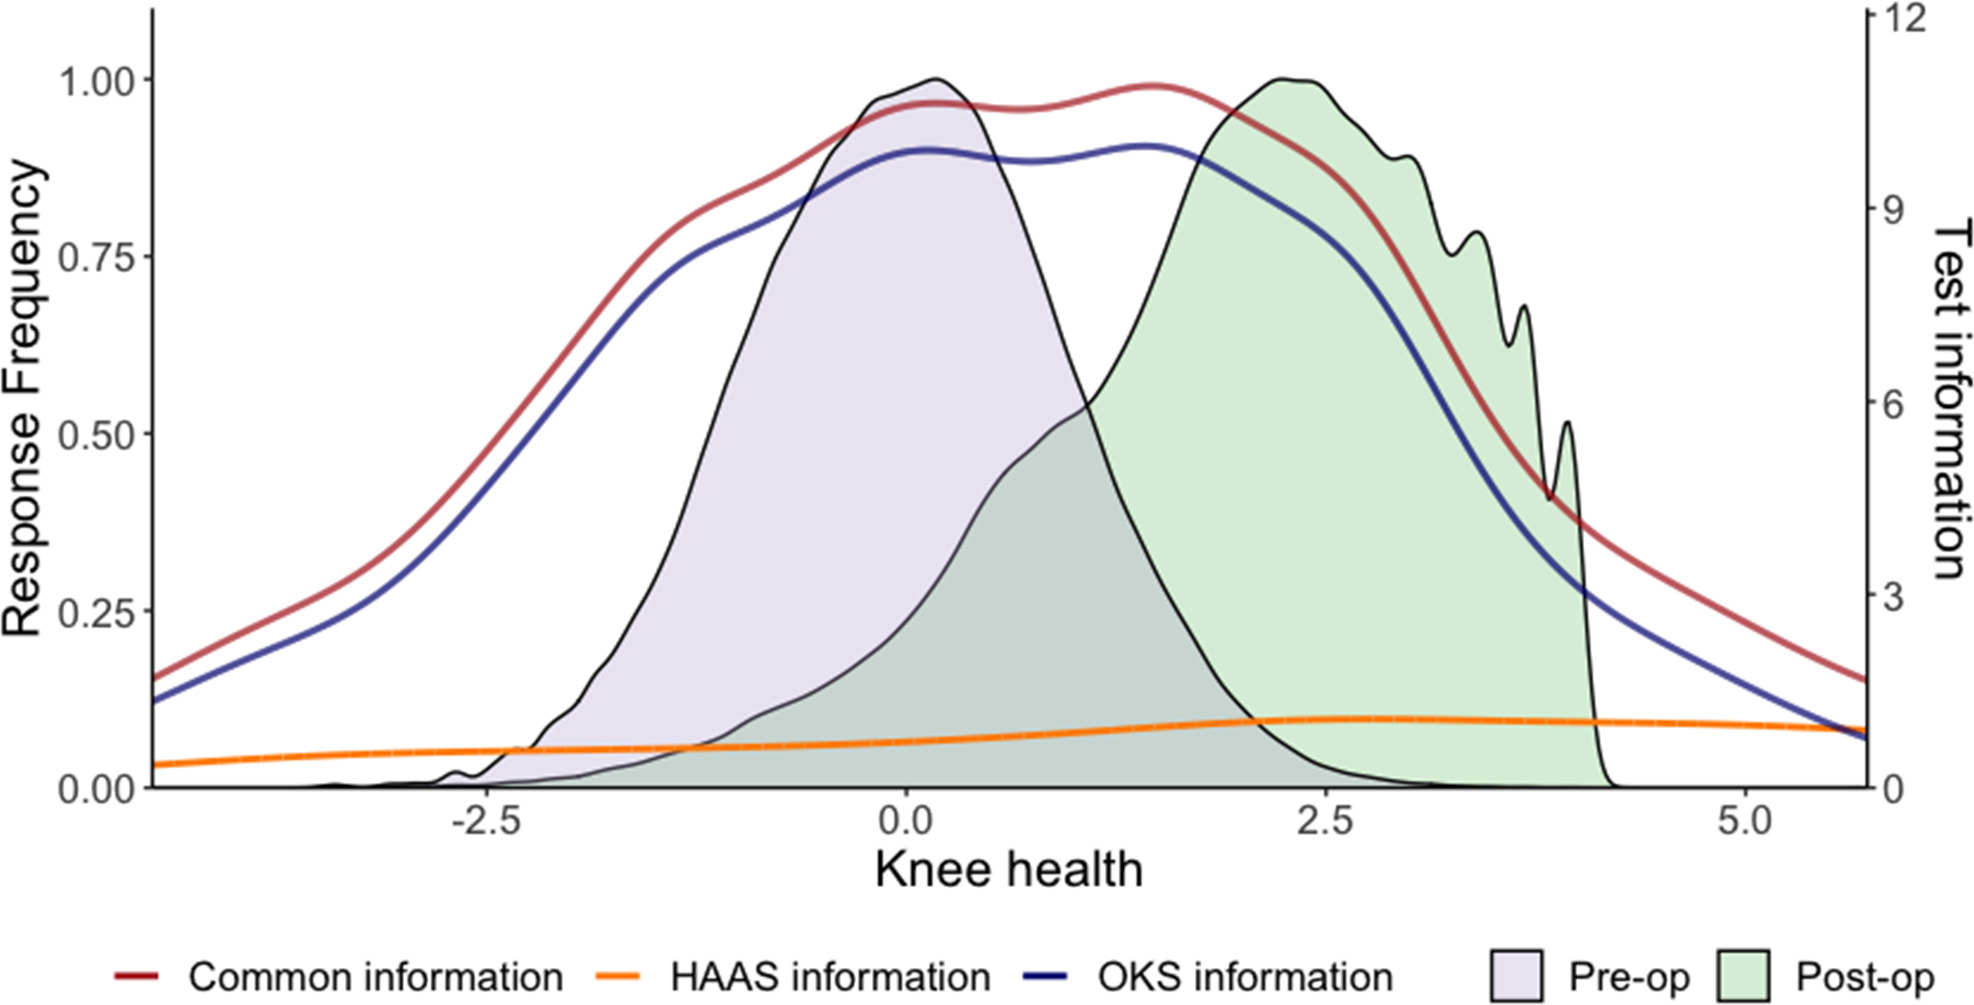 Fig. 4 
            Information provided by the Oxford Knee Score (OKS), the High Activity Arthroplasty Score (HAAS), and the combined measure. The orange line represents the test-level information of the HAAS across different levels of knee health, the blue line represents the test-level information of the OKS, and the red line represents the test-level information of both instruments combined. Information levels greater than 9.8 are considered to indicate excellent measurement precision. For reference, the score distributions of preoperative and postoperative arthroplasty patients in the NHS patient-reported outcome measures registry have been included and shaded magenta and green, respectively. The combined instrument provides more precise measurement than the OKS alone, within a knee health range that is relevant to patients undergoing arthroplasty.
          